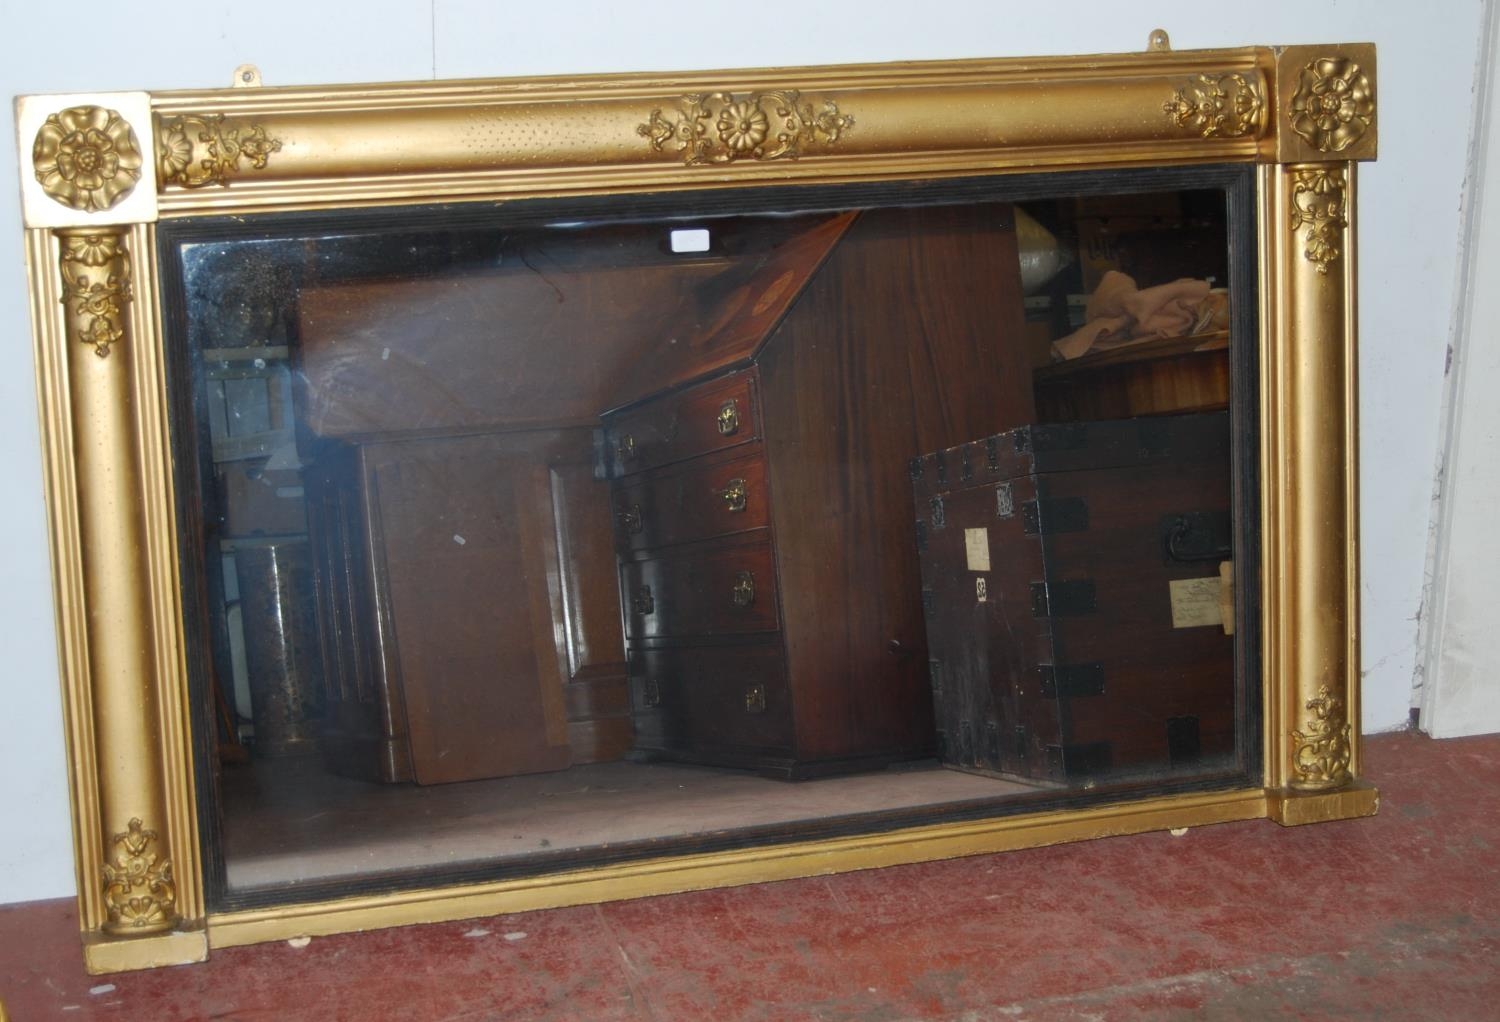 19th century Regency-style giltwood overmantel mirror decorated with moulded rose roundels, mirror